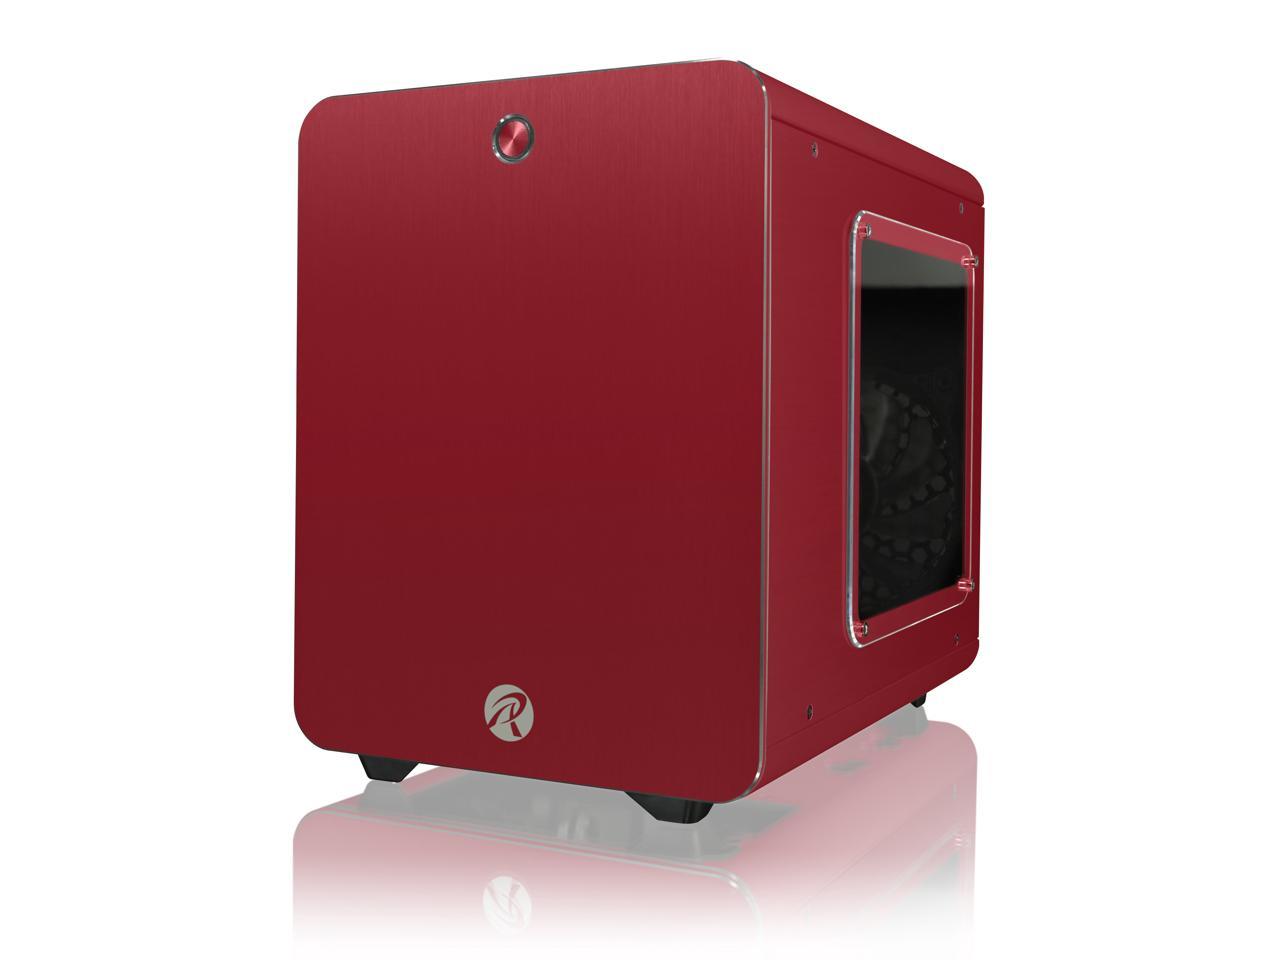 RAIJINTEK METIS PLUS RED, a Alu. M-ITX Case, USB 3.0* 2, Compatible with Standard ATX Power Supply, 170mm VGA Card Length, 160mm CPU Cooler Height, 12025 White LED Fan Installed, ventilate hole on top